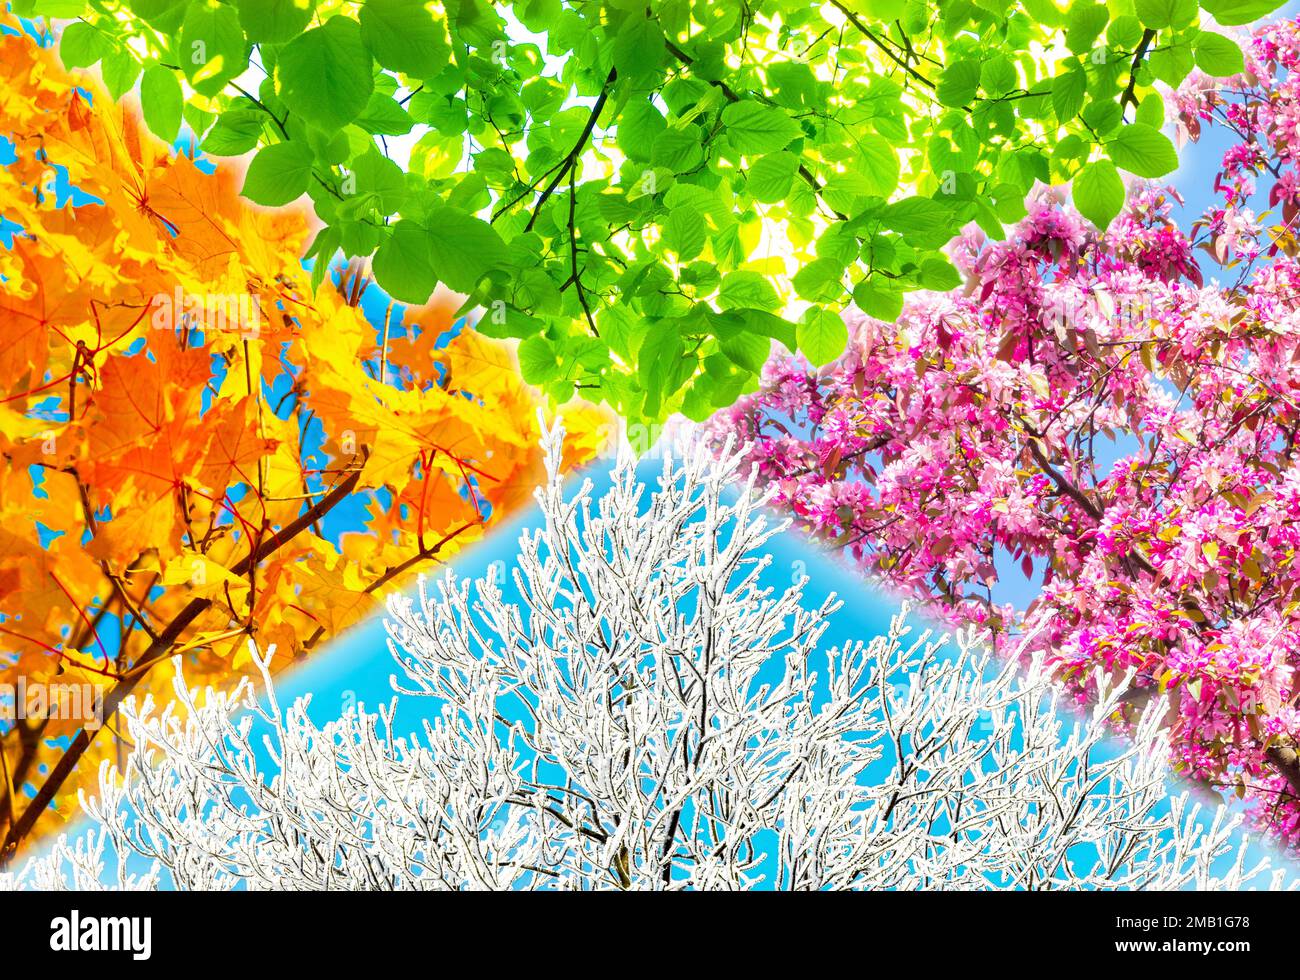 Collage of four nature tree pictures representing each season: spring, summer, autumn and winter. Stock Photo